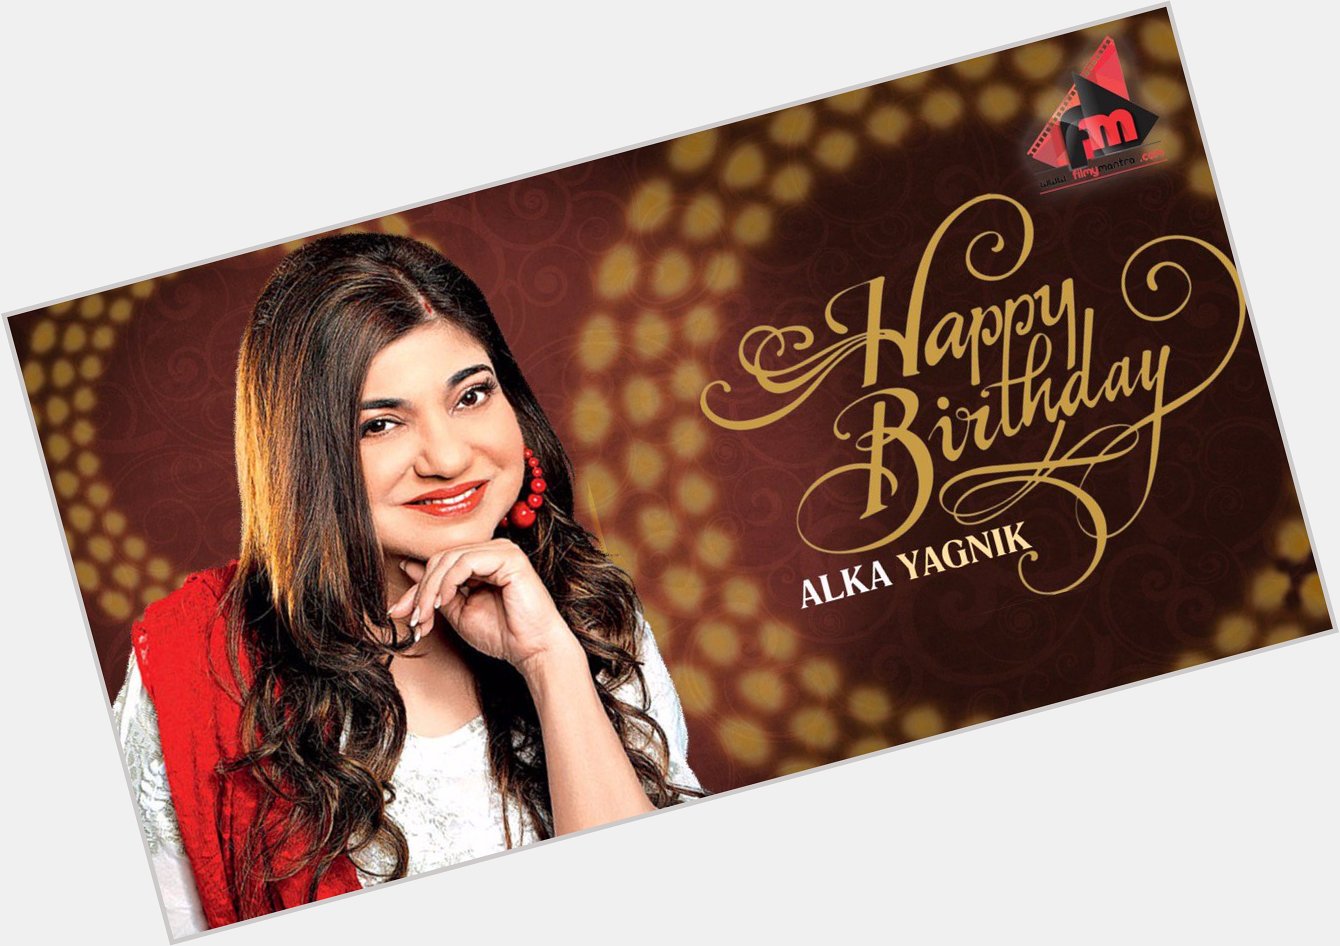 Happy birthday to extremely talented singer Alka Yagnik from team Filmymantra 